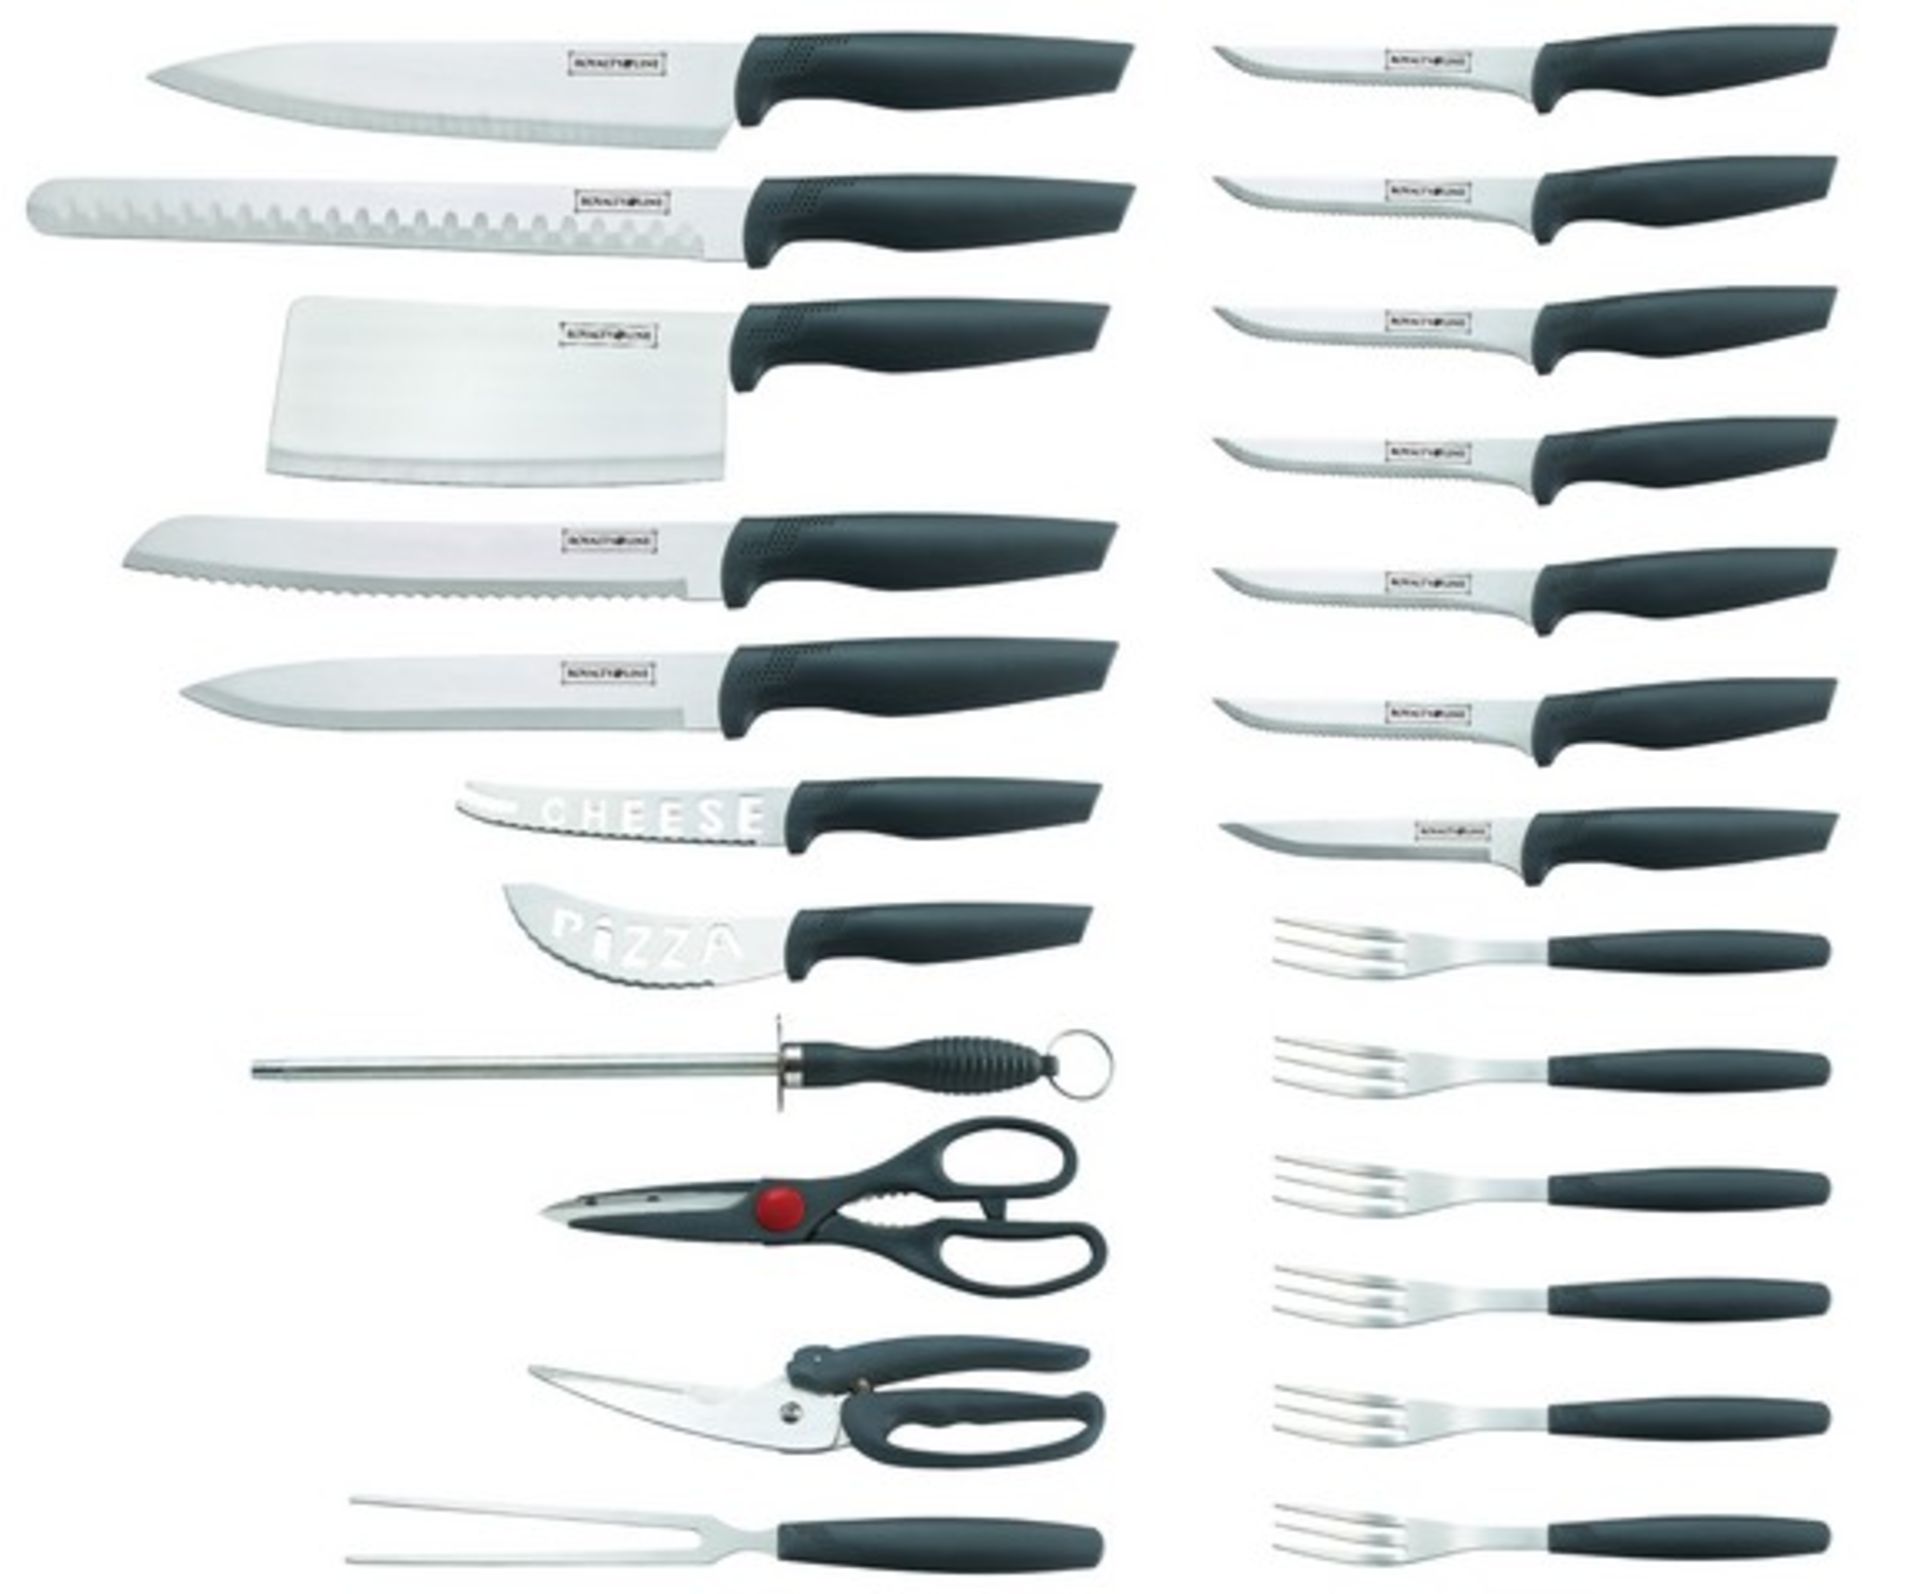 + VAT Brand New 24 Piece Stainless Steel Knife Set-Includes 6 x Forks and 6 x Steak Knives-1 x